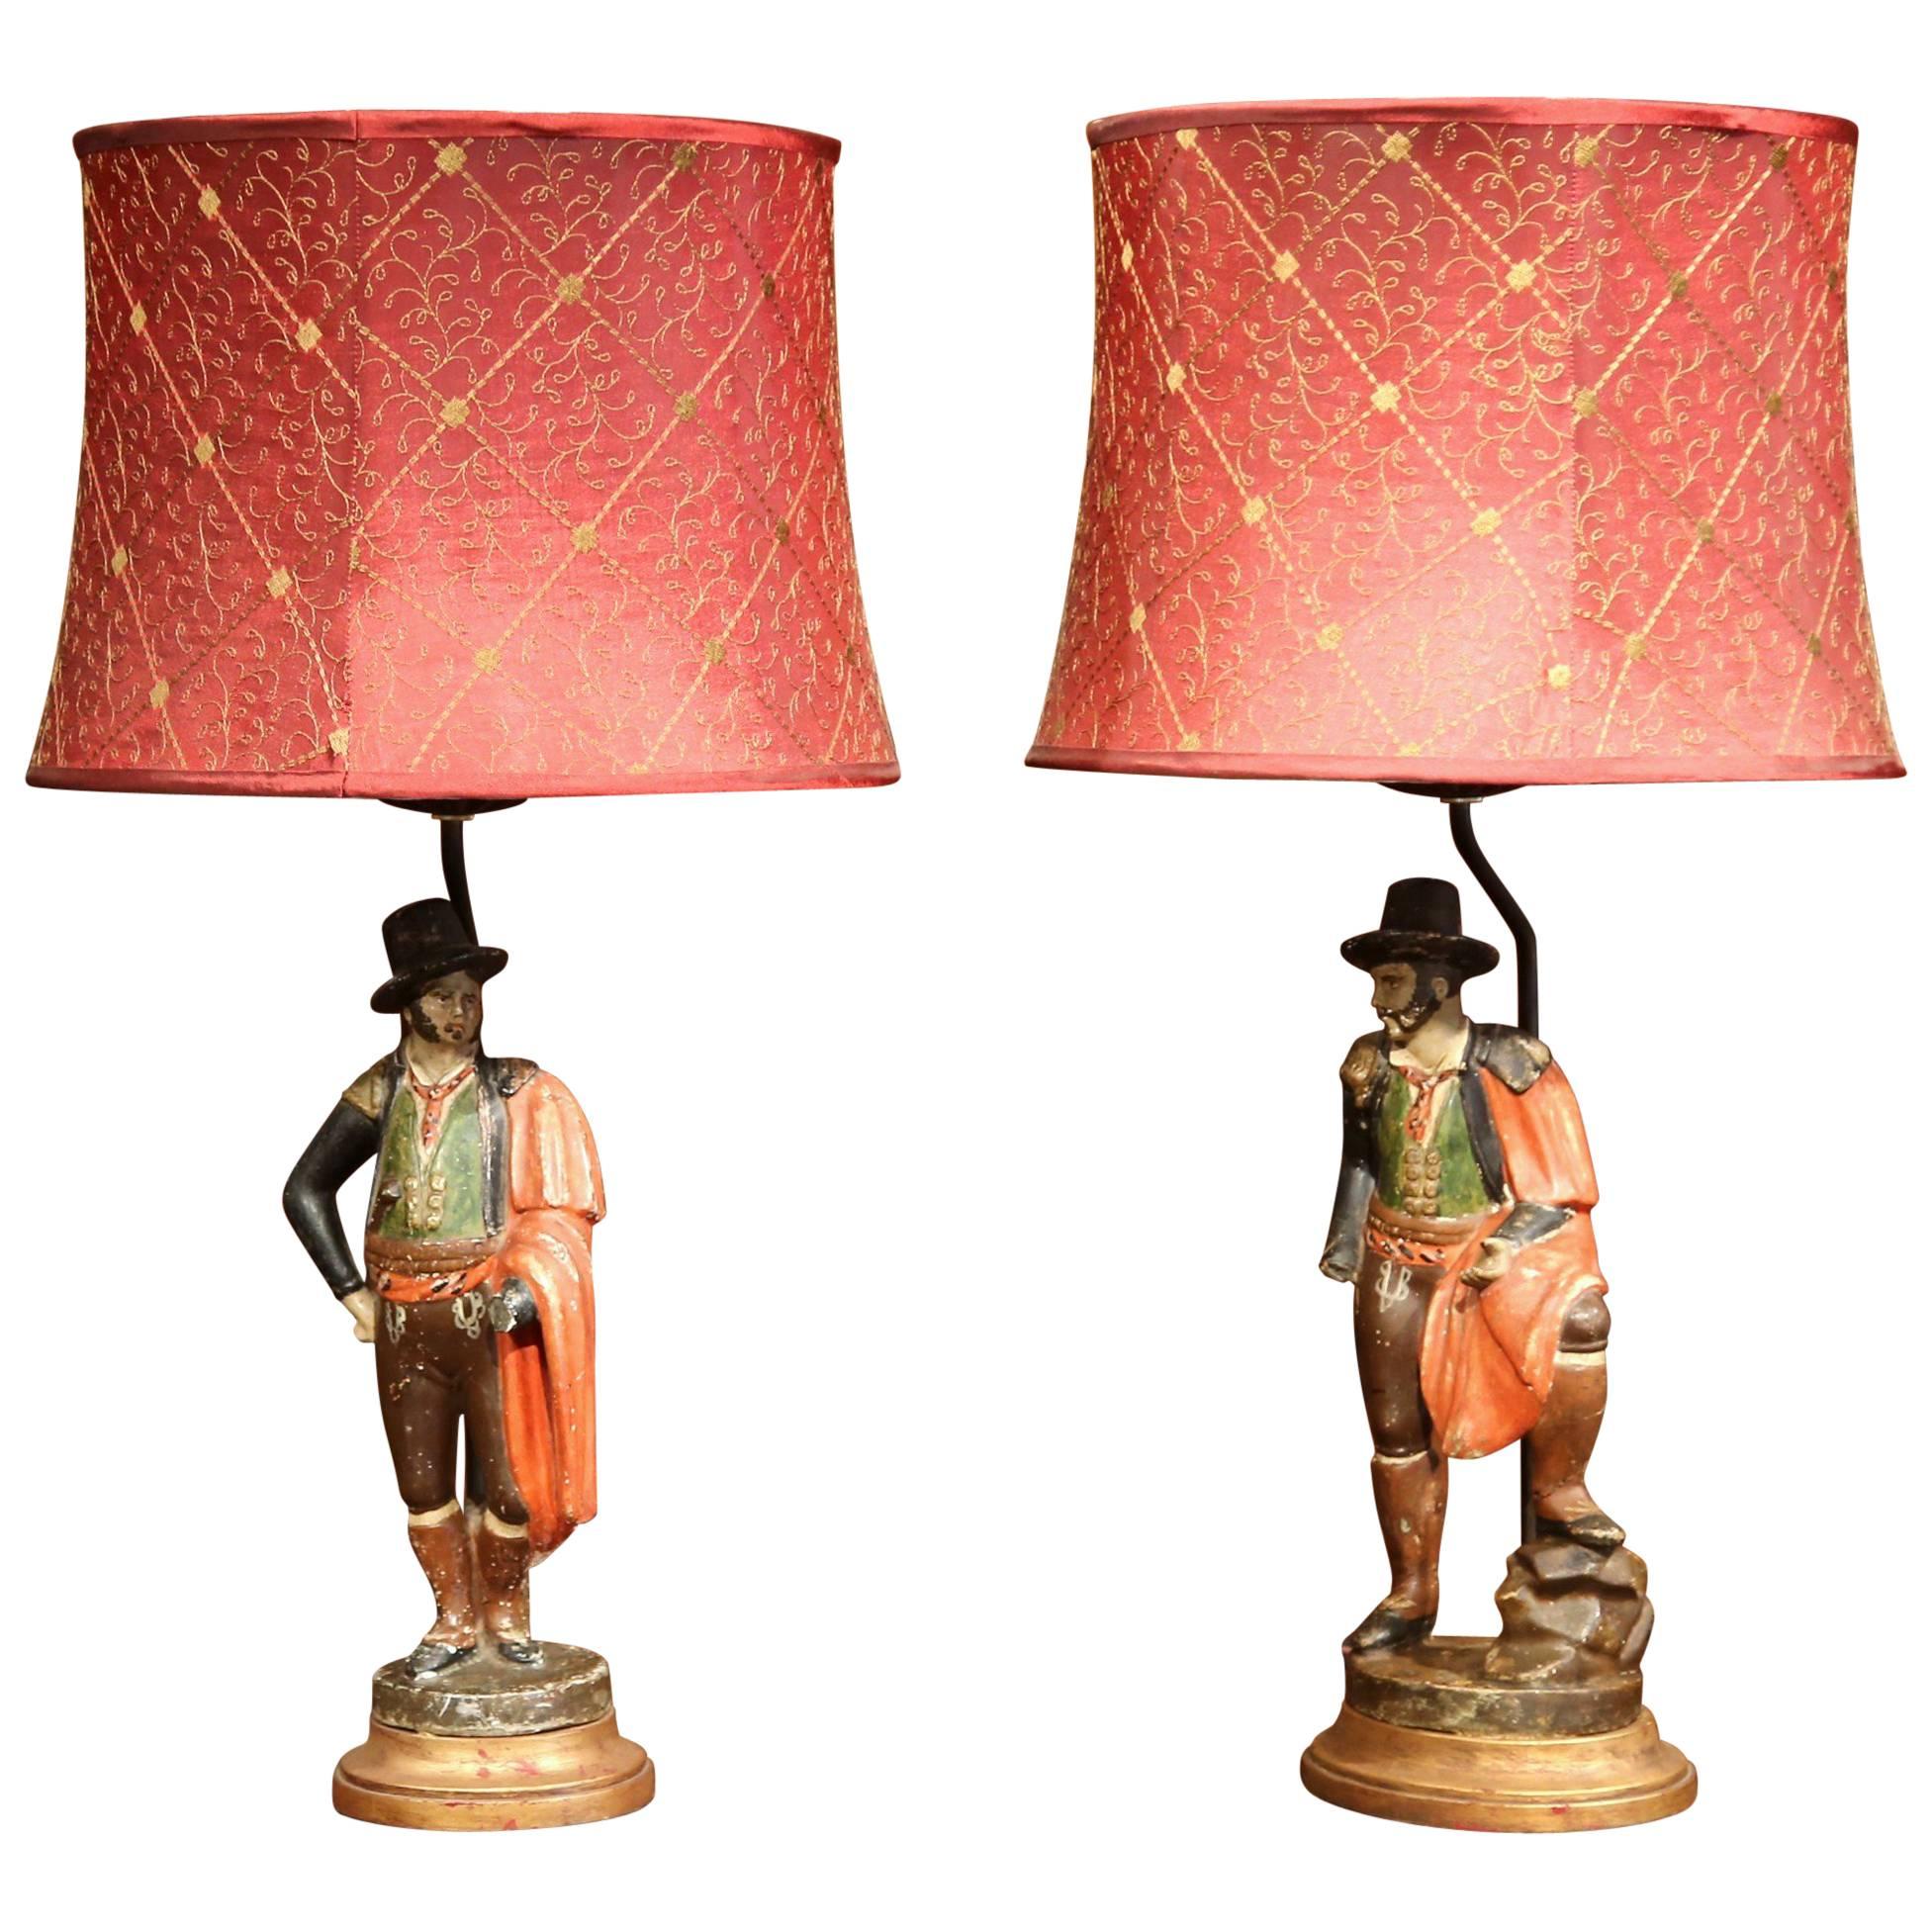 Pair of 19th Century Spanish Carved Polychrome Matadors Sculpture Table Lamps